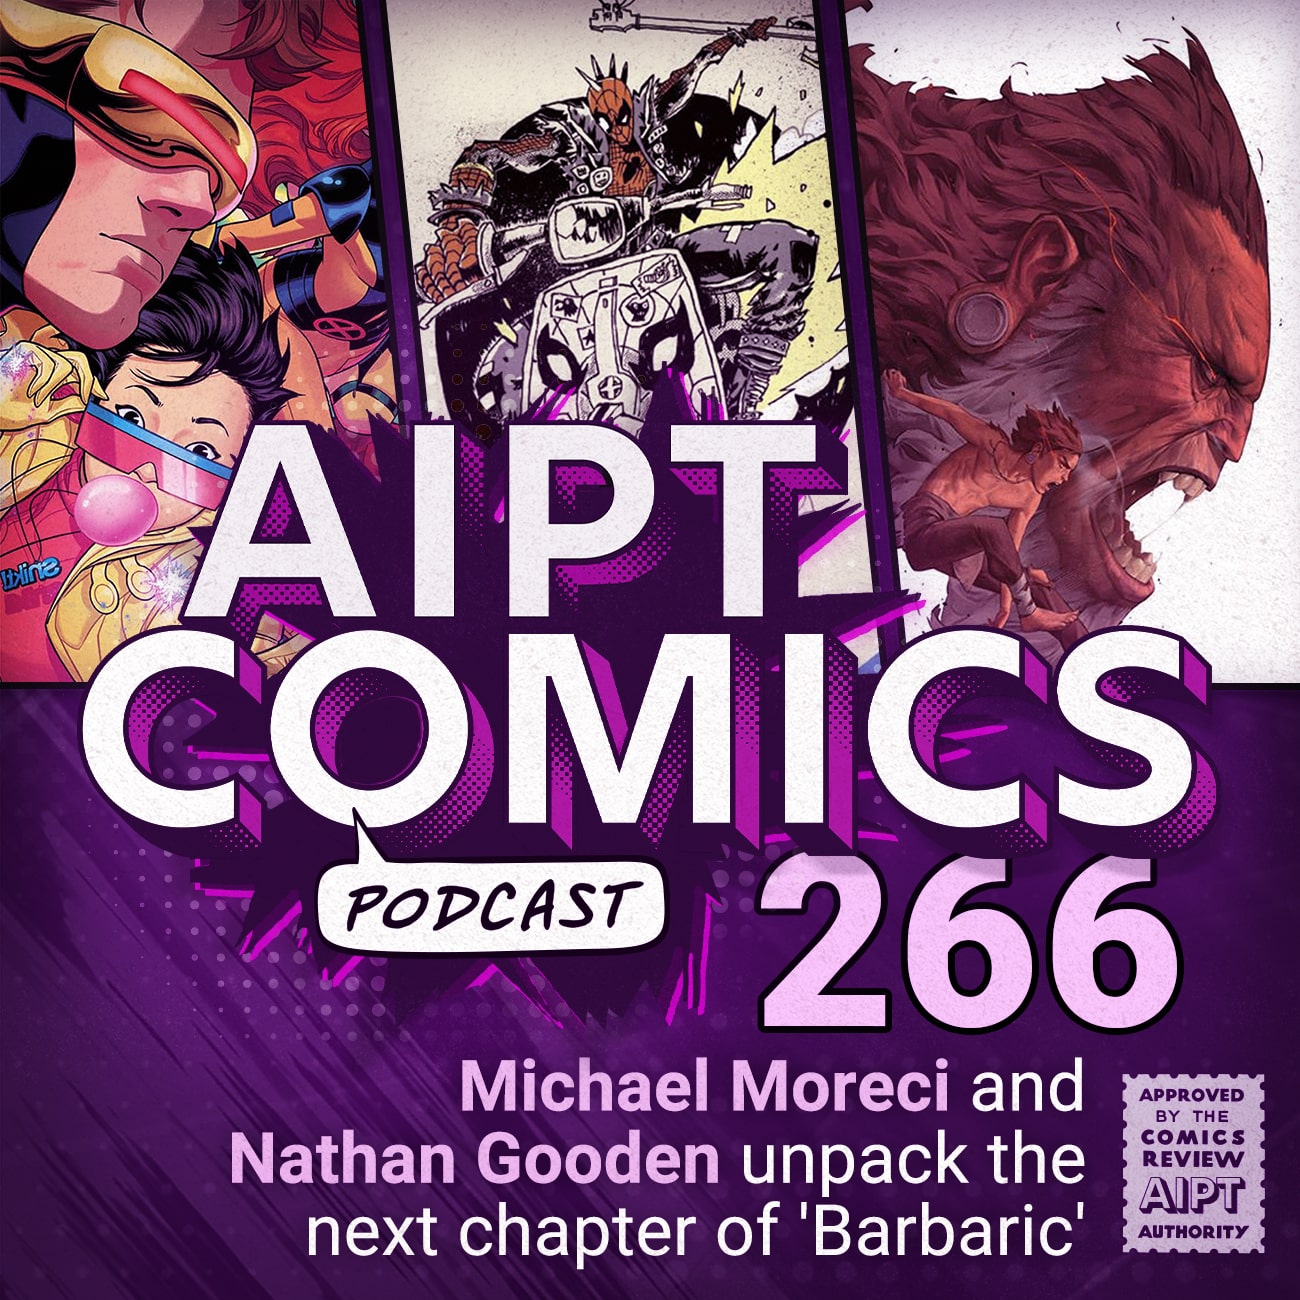 AIPT Comics Podcast Episode 266: Michael Moreci and Nathan Gooden unpack the next chapter of 'Barbaric'